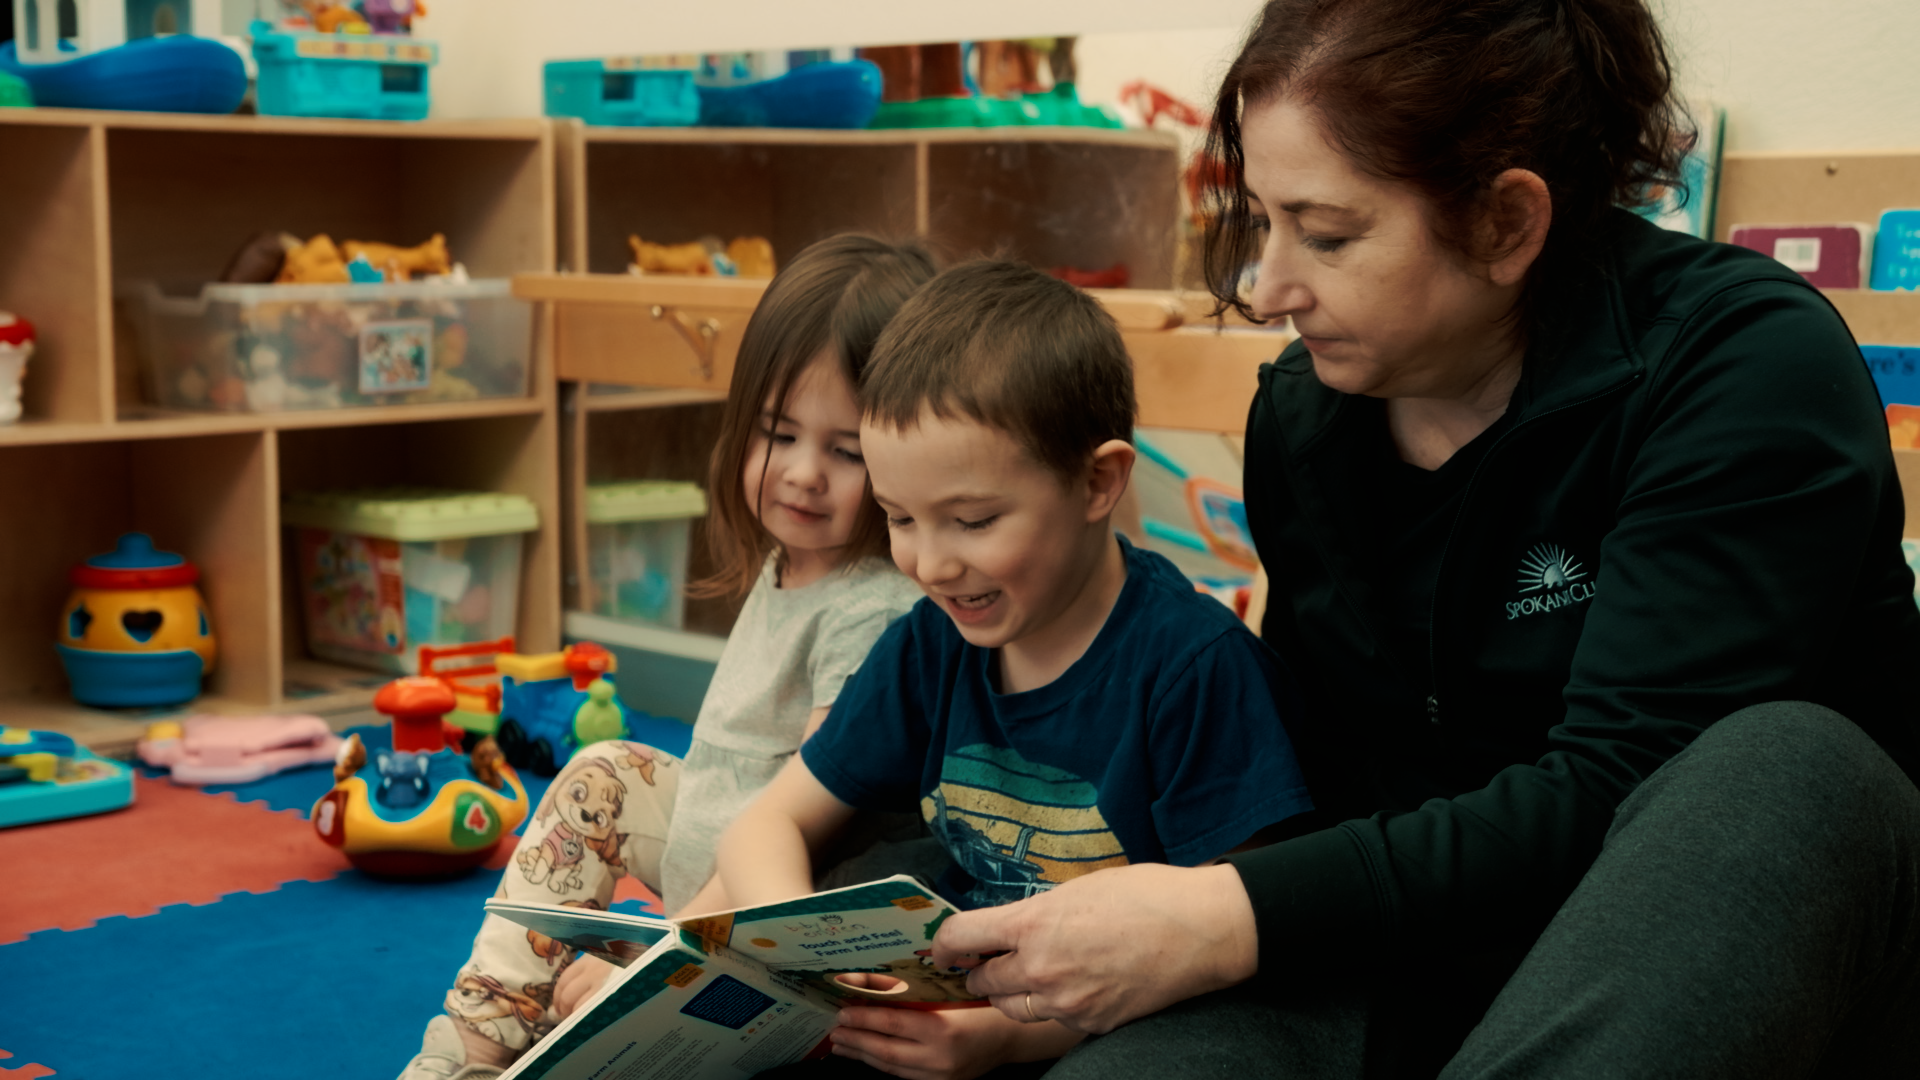 Tracey from the Spokane Club childcare team sits with a couple young kids and reads them a story. The Spokane Club offers 3 hours of complimentary childcare every day for family memberships.